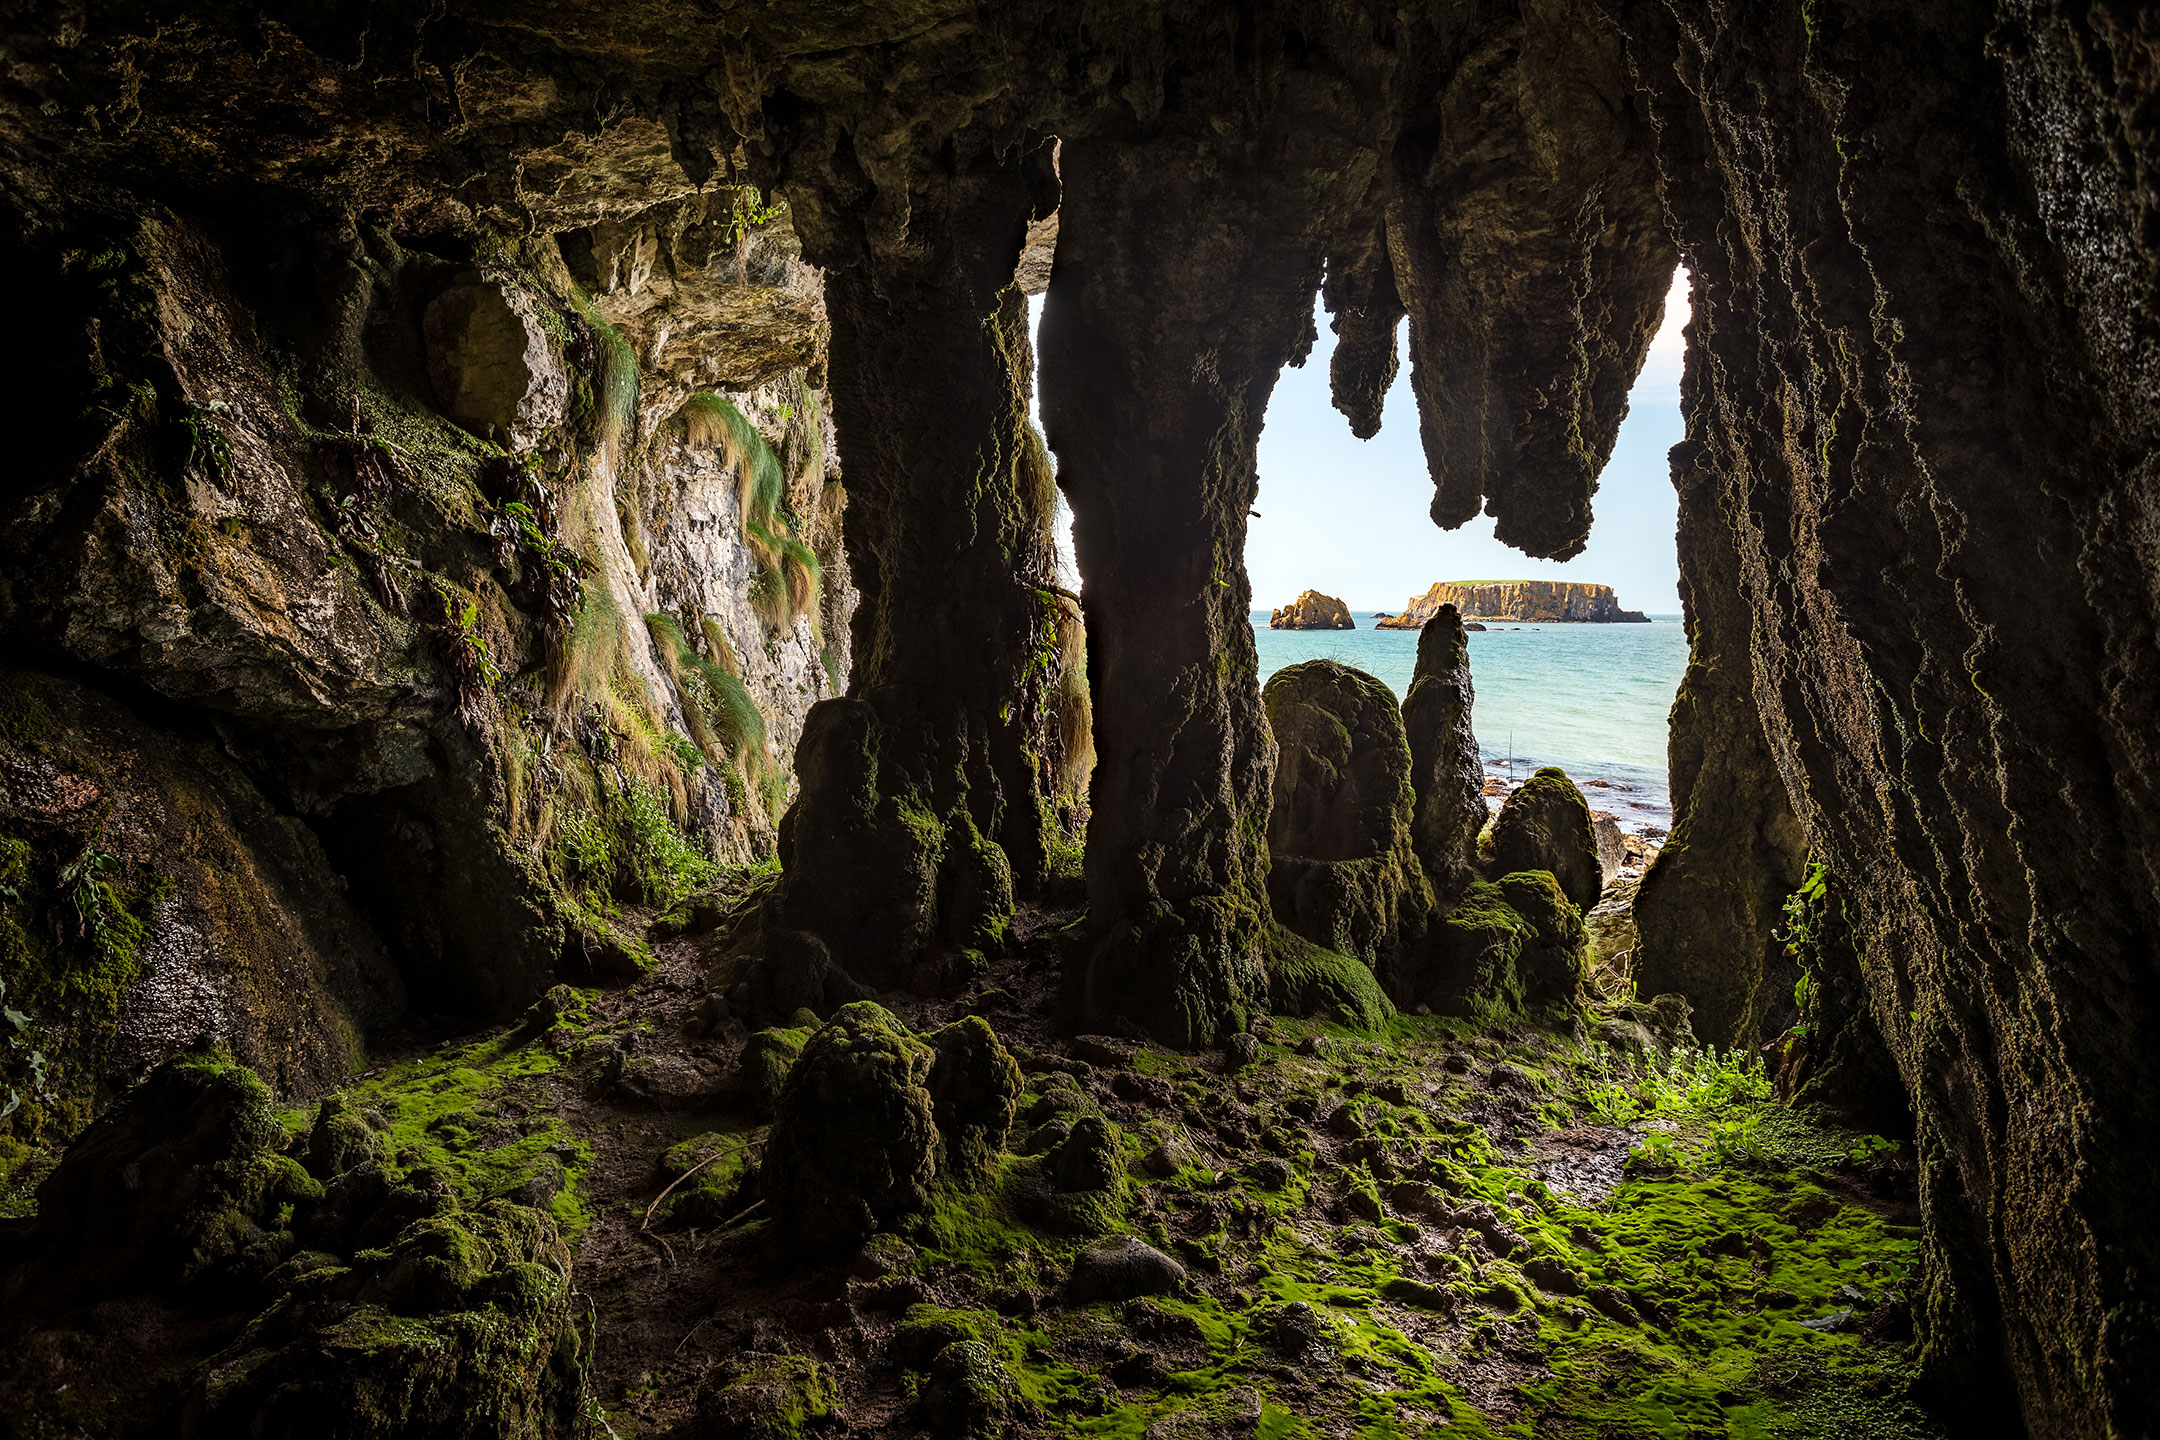 Looking out of the Larrybane Cave to Sheep Island, County Antrim, Northern Ireland